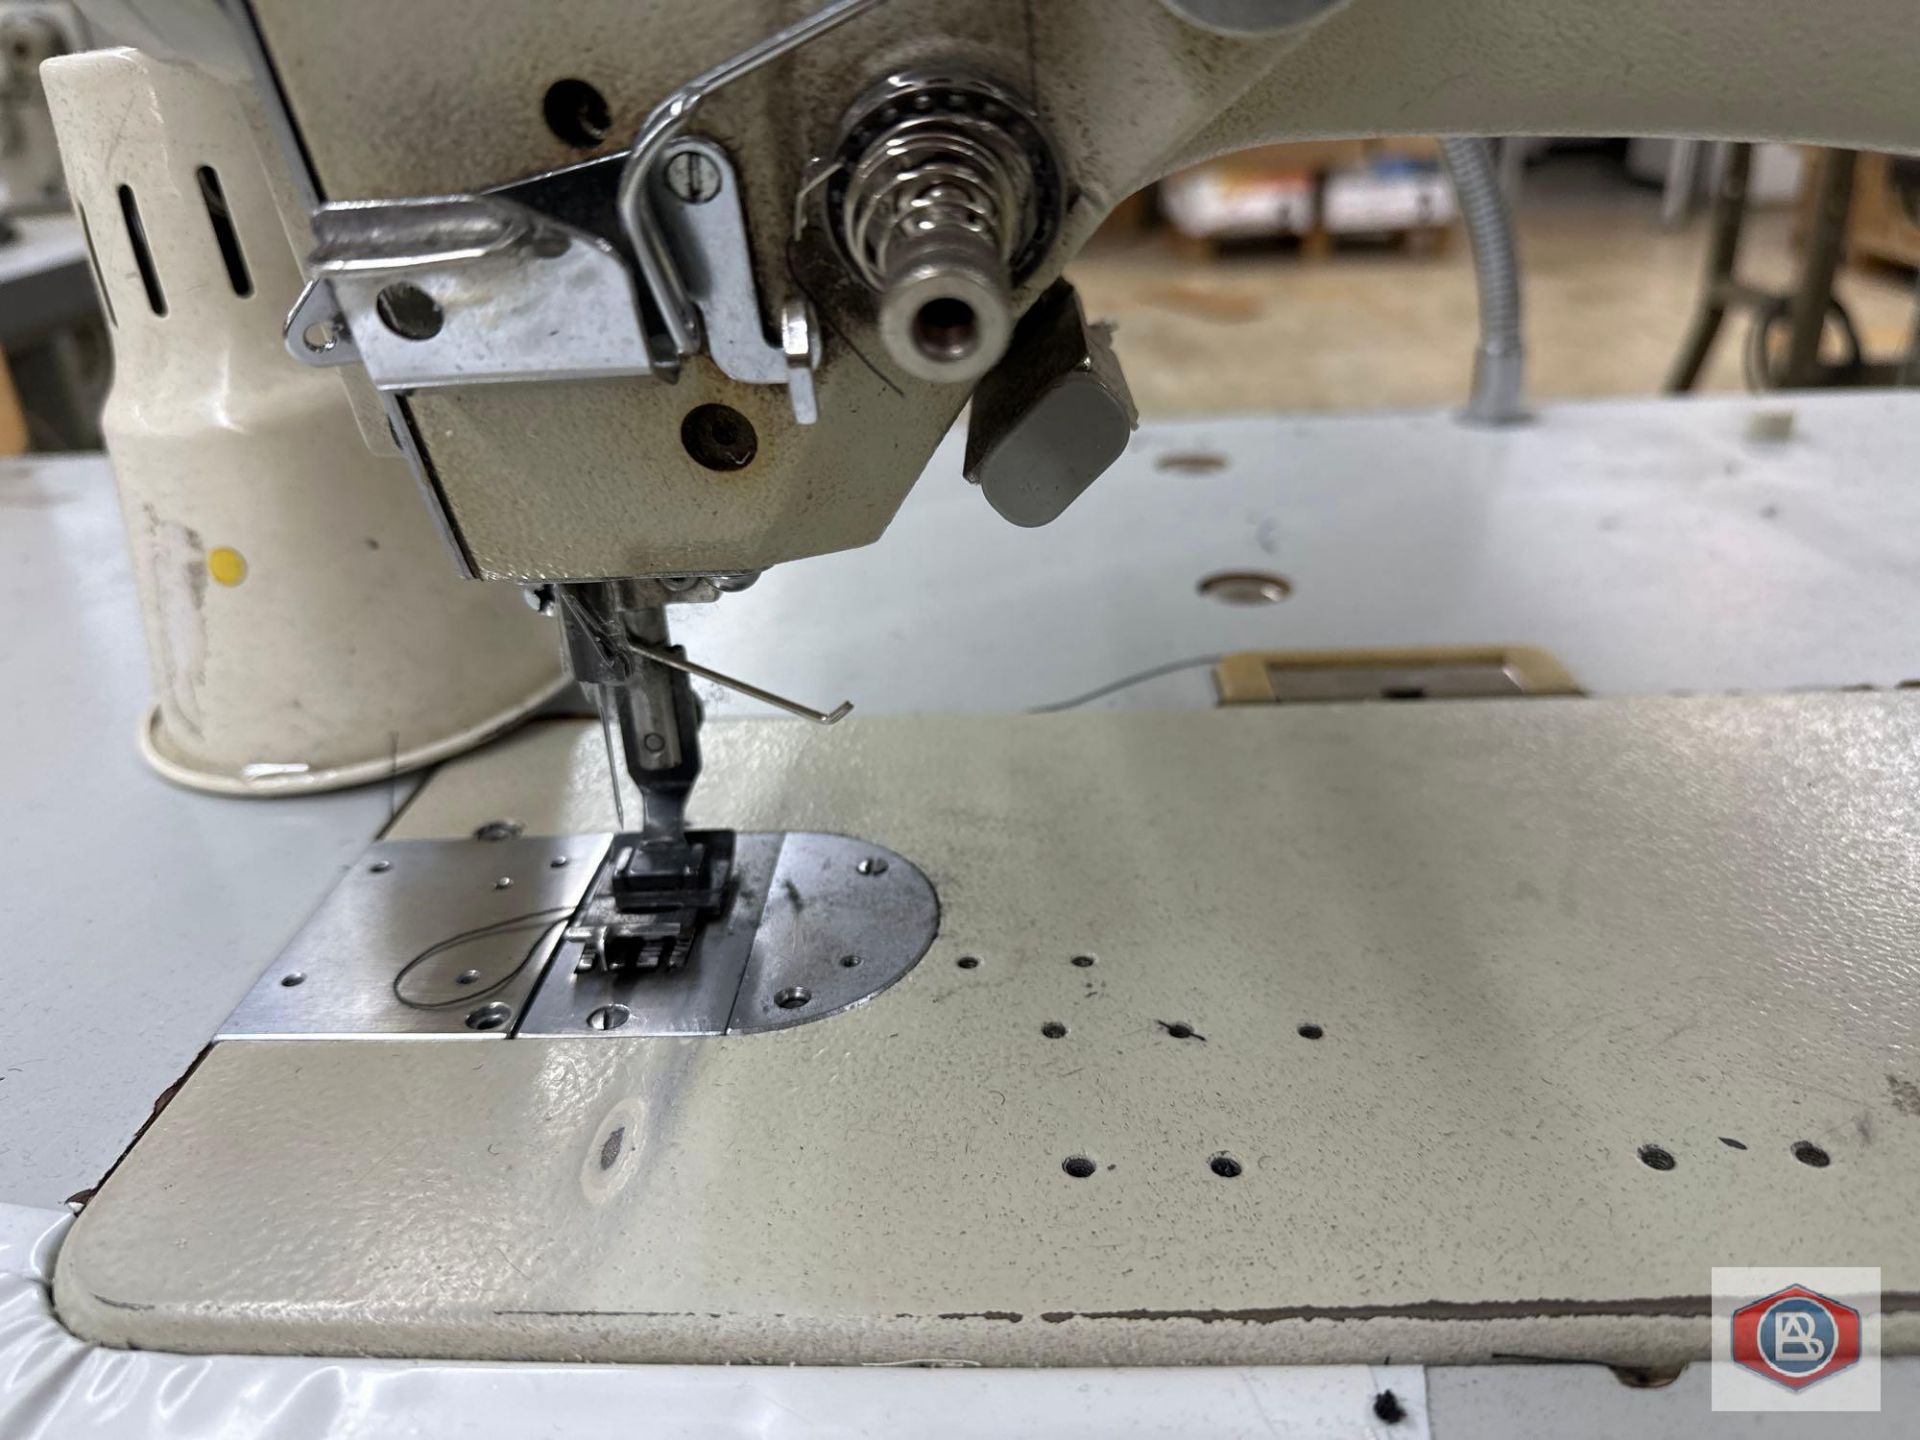 Brother Sewing Machine - Image 4 of 5